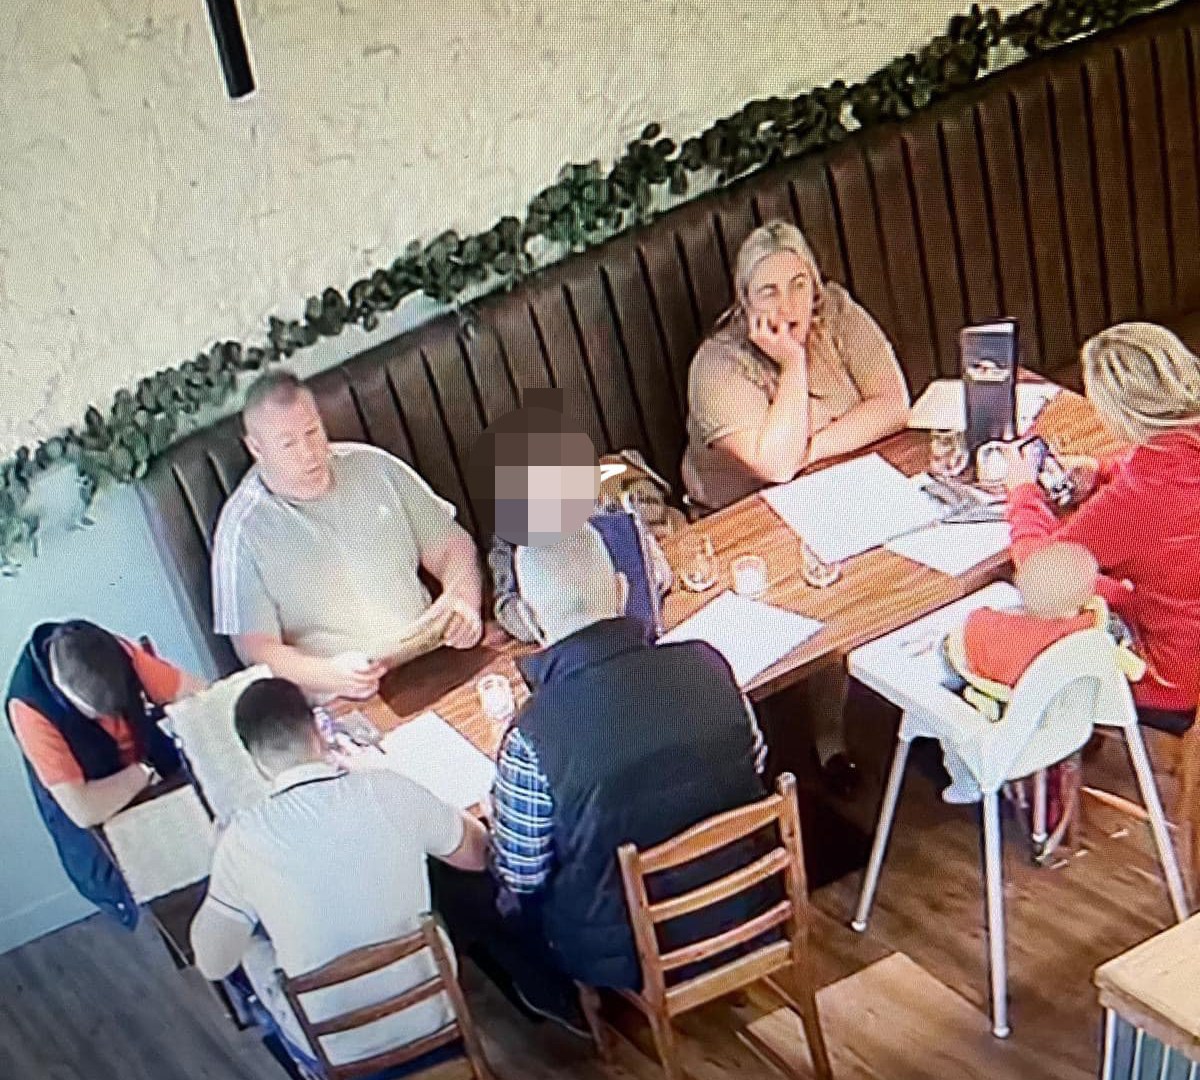 Serial dine and dash family-of-8 caught on camera doing runners at MORE restaurants - and are feared to have hit 7 [Video]